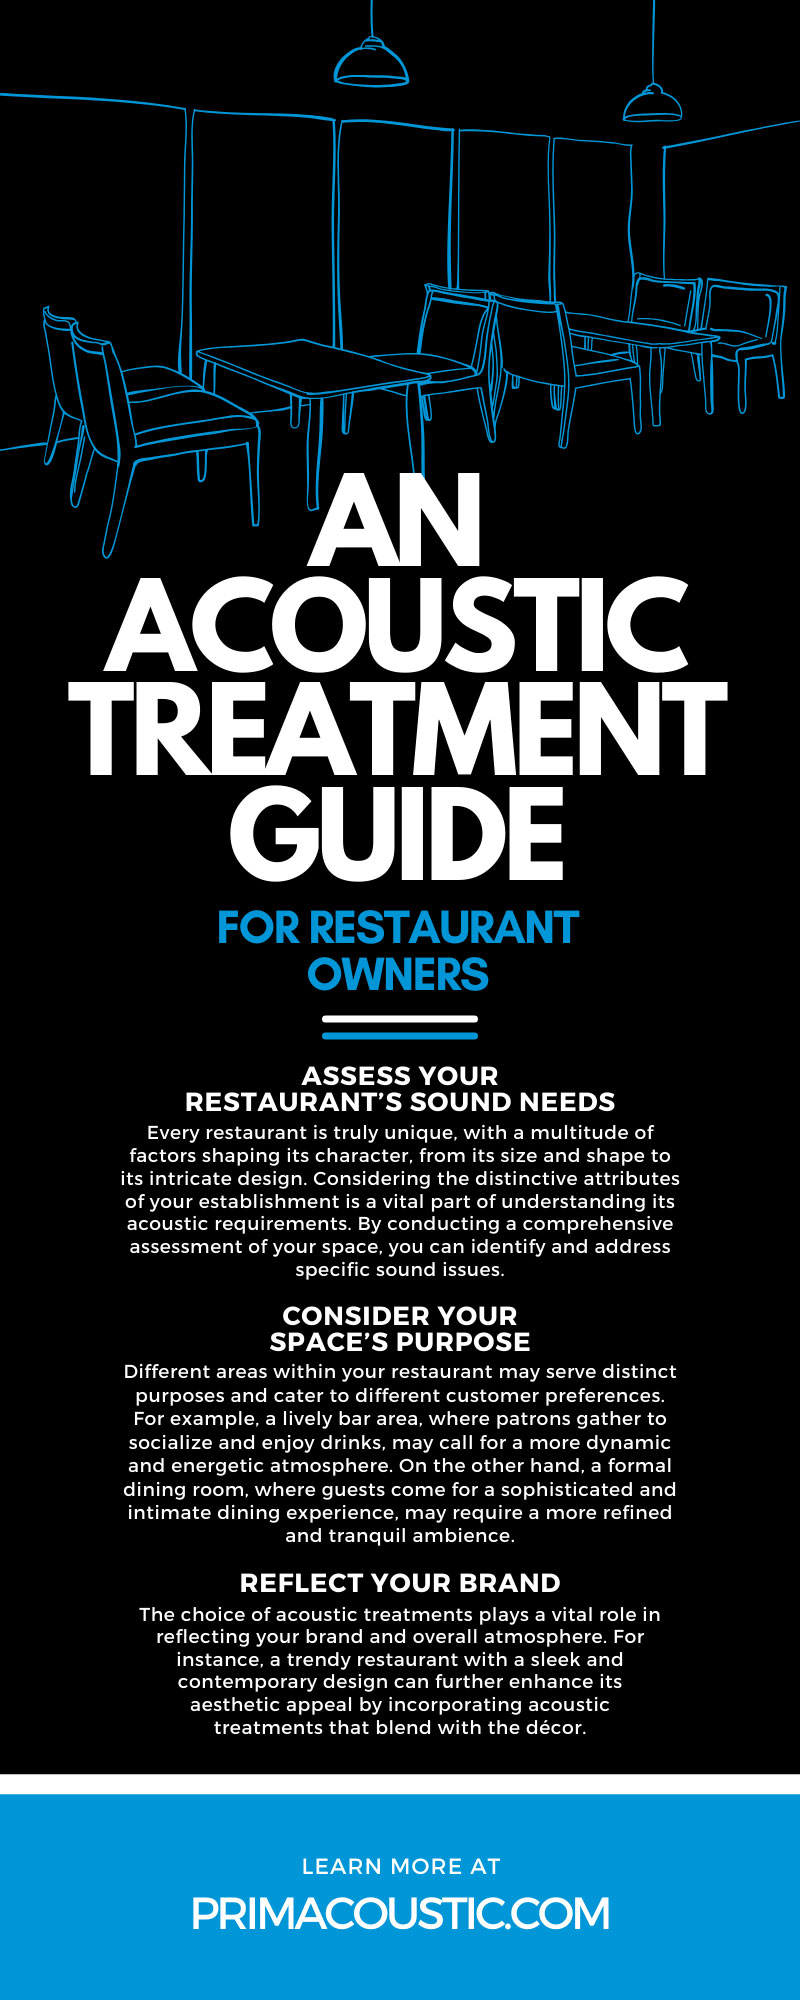 An Acoustic Treatment Guide for Restaurant Owners